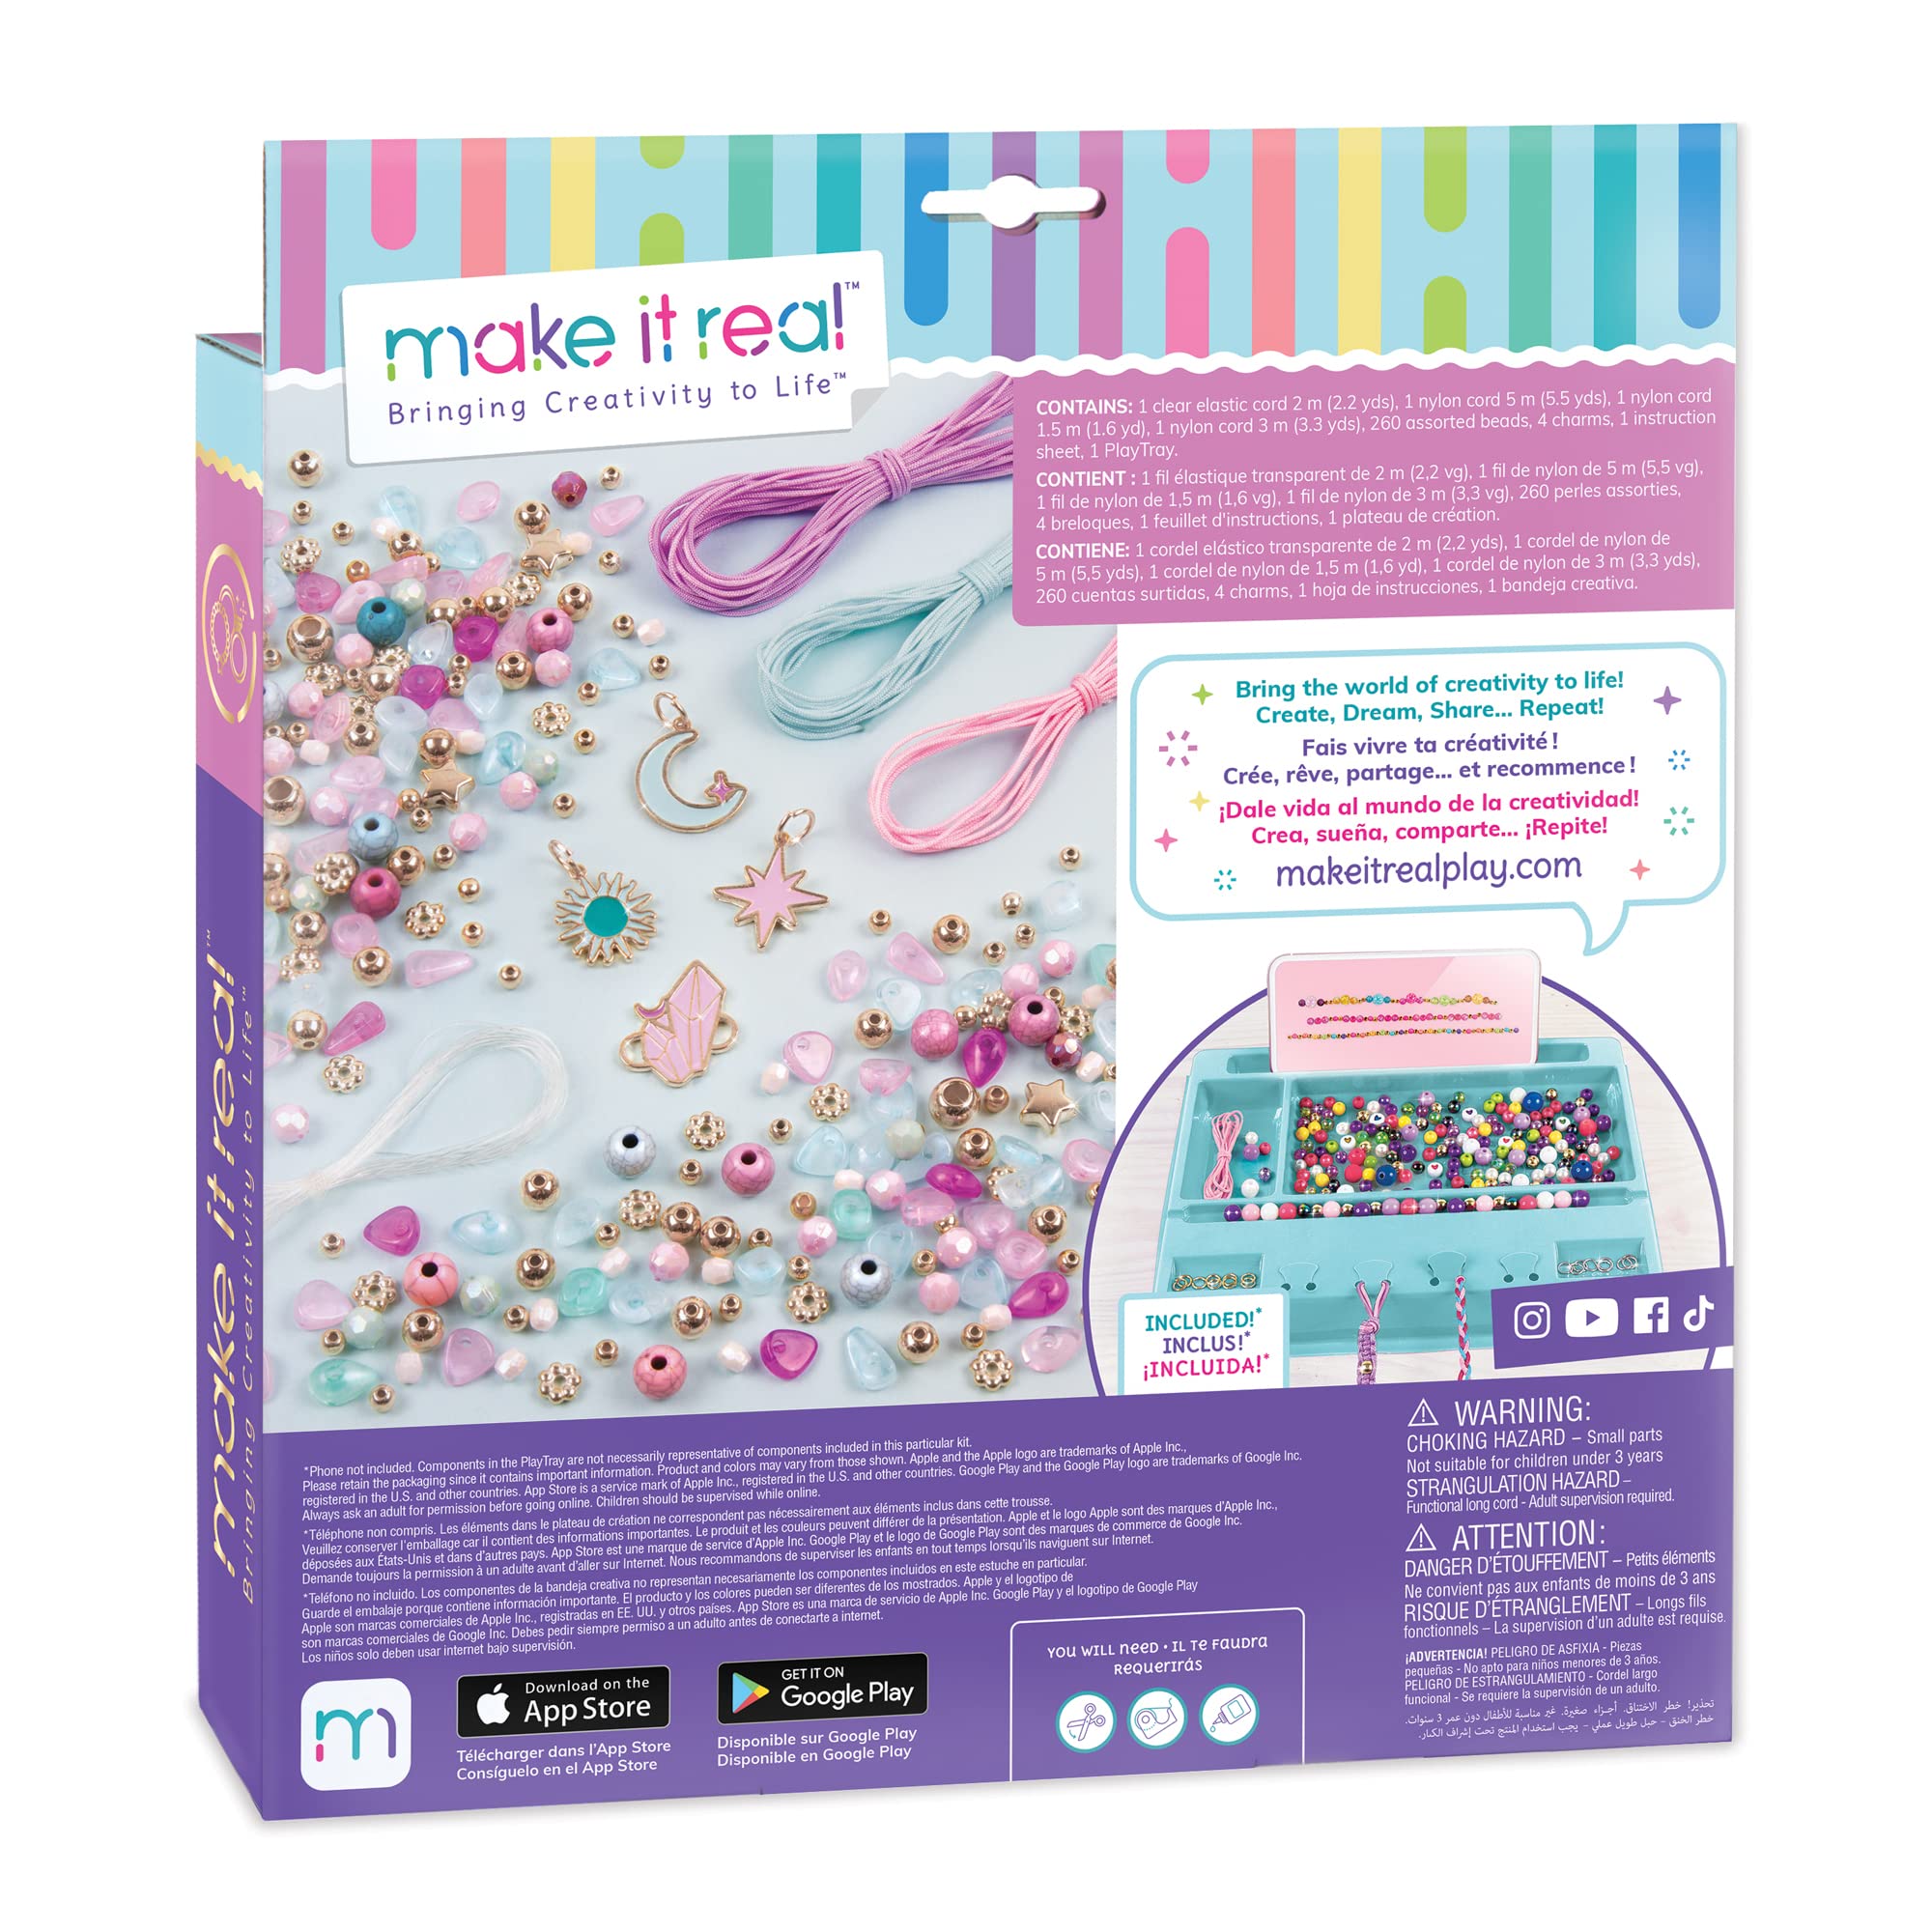 Make It Real: Celestial Stones Bracelets Kit - Create 8 Fashionable Bracelets, 4 Celestial Charms, 270 Pieces, Includes Play Tray, All-in-One, DIY Jewelry Kit, Tweens & Girls, Arts & Crafts, Ages 8+